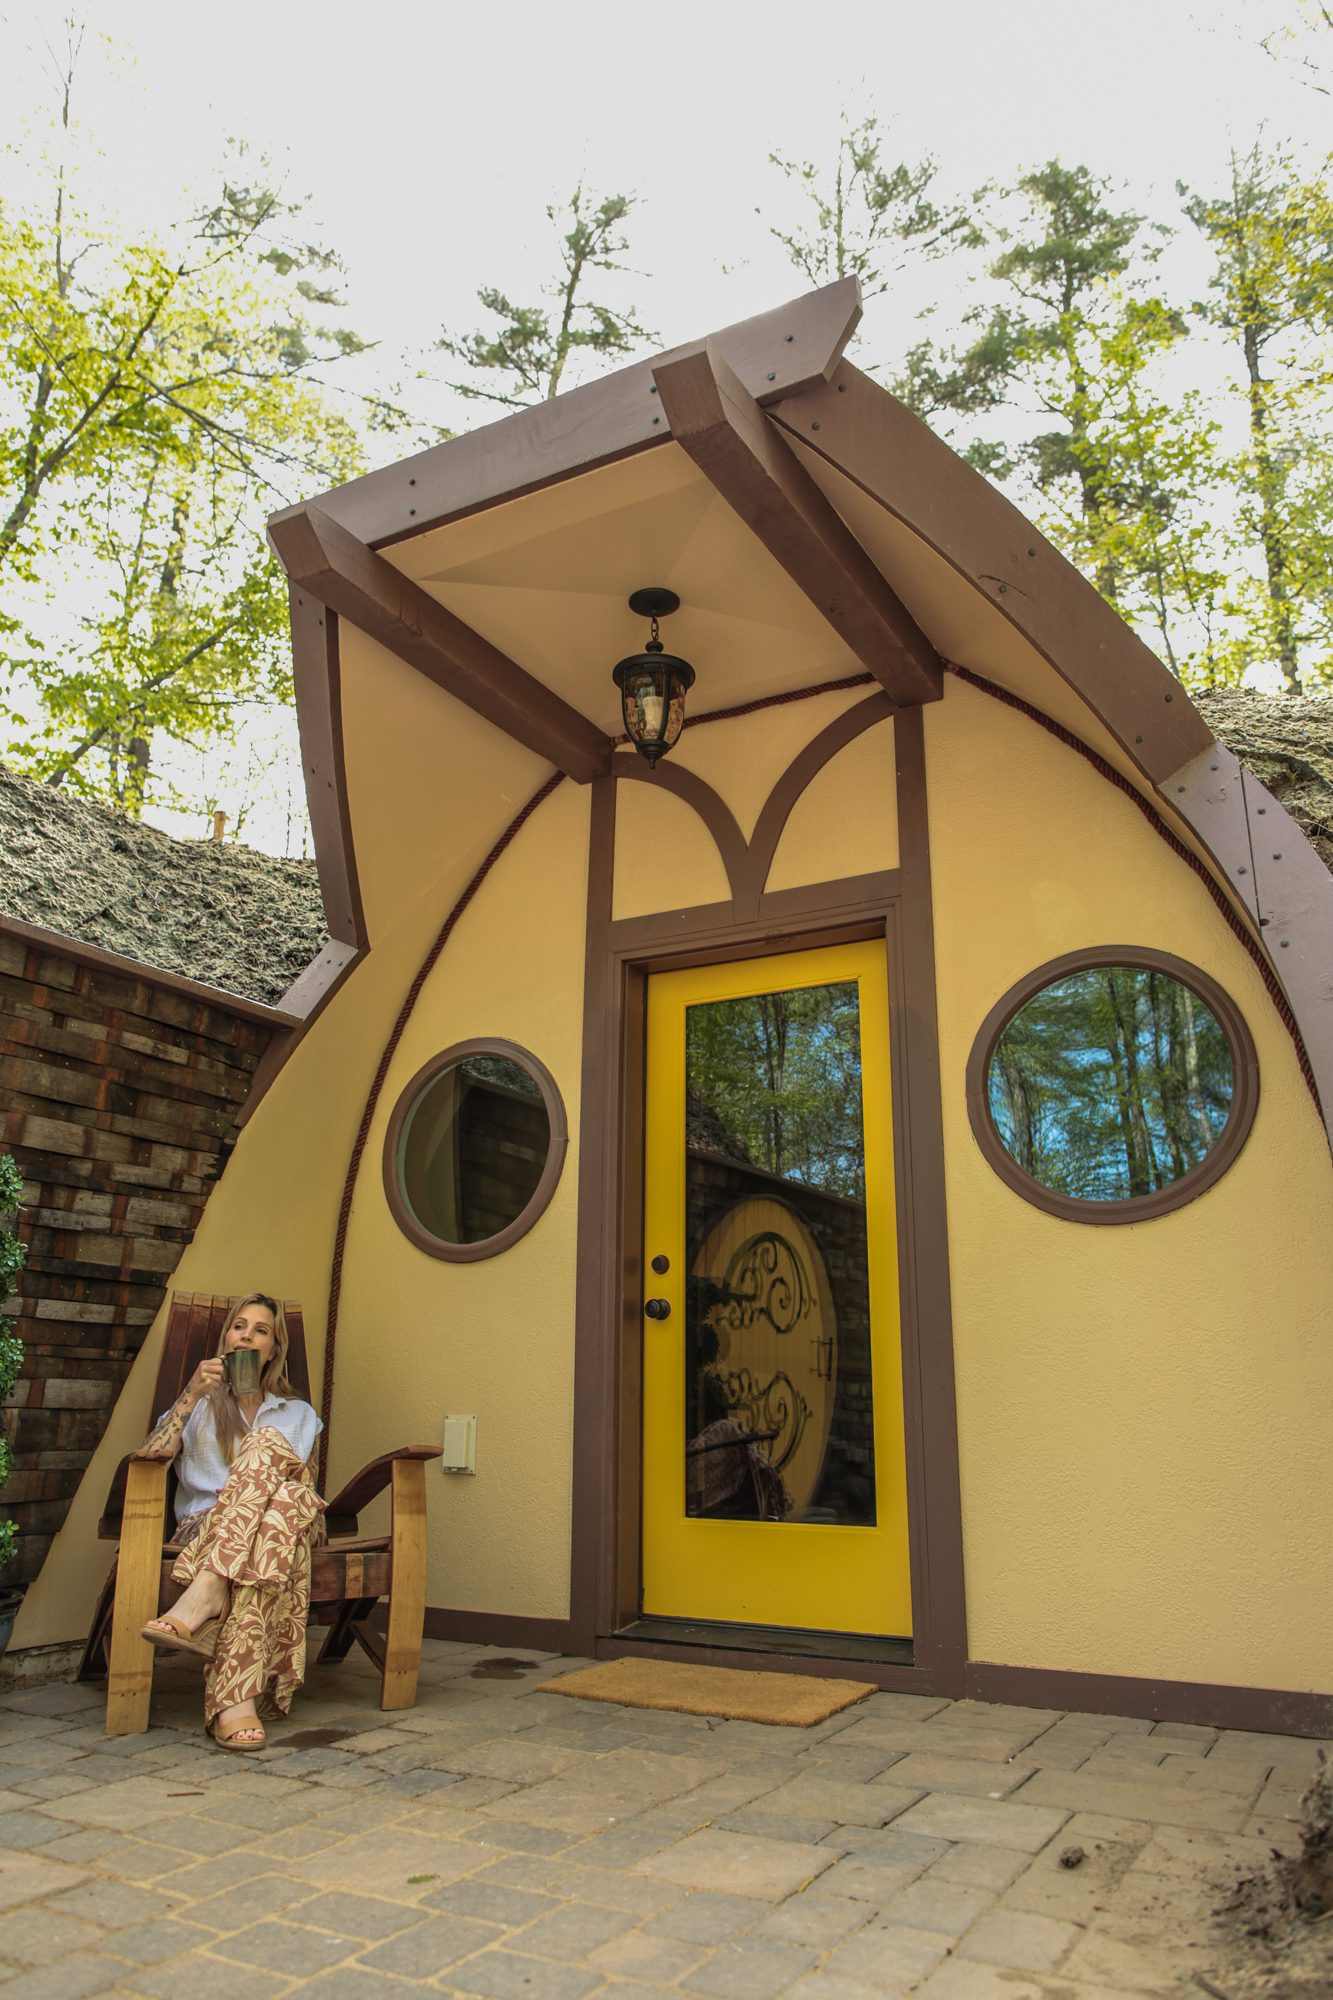 Hobbit home tiny house vacation rental in Maine